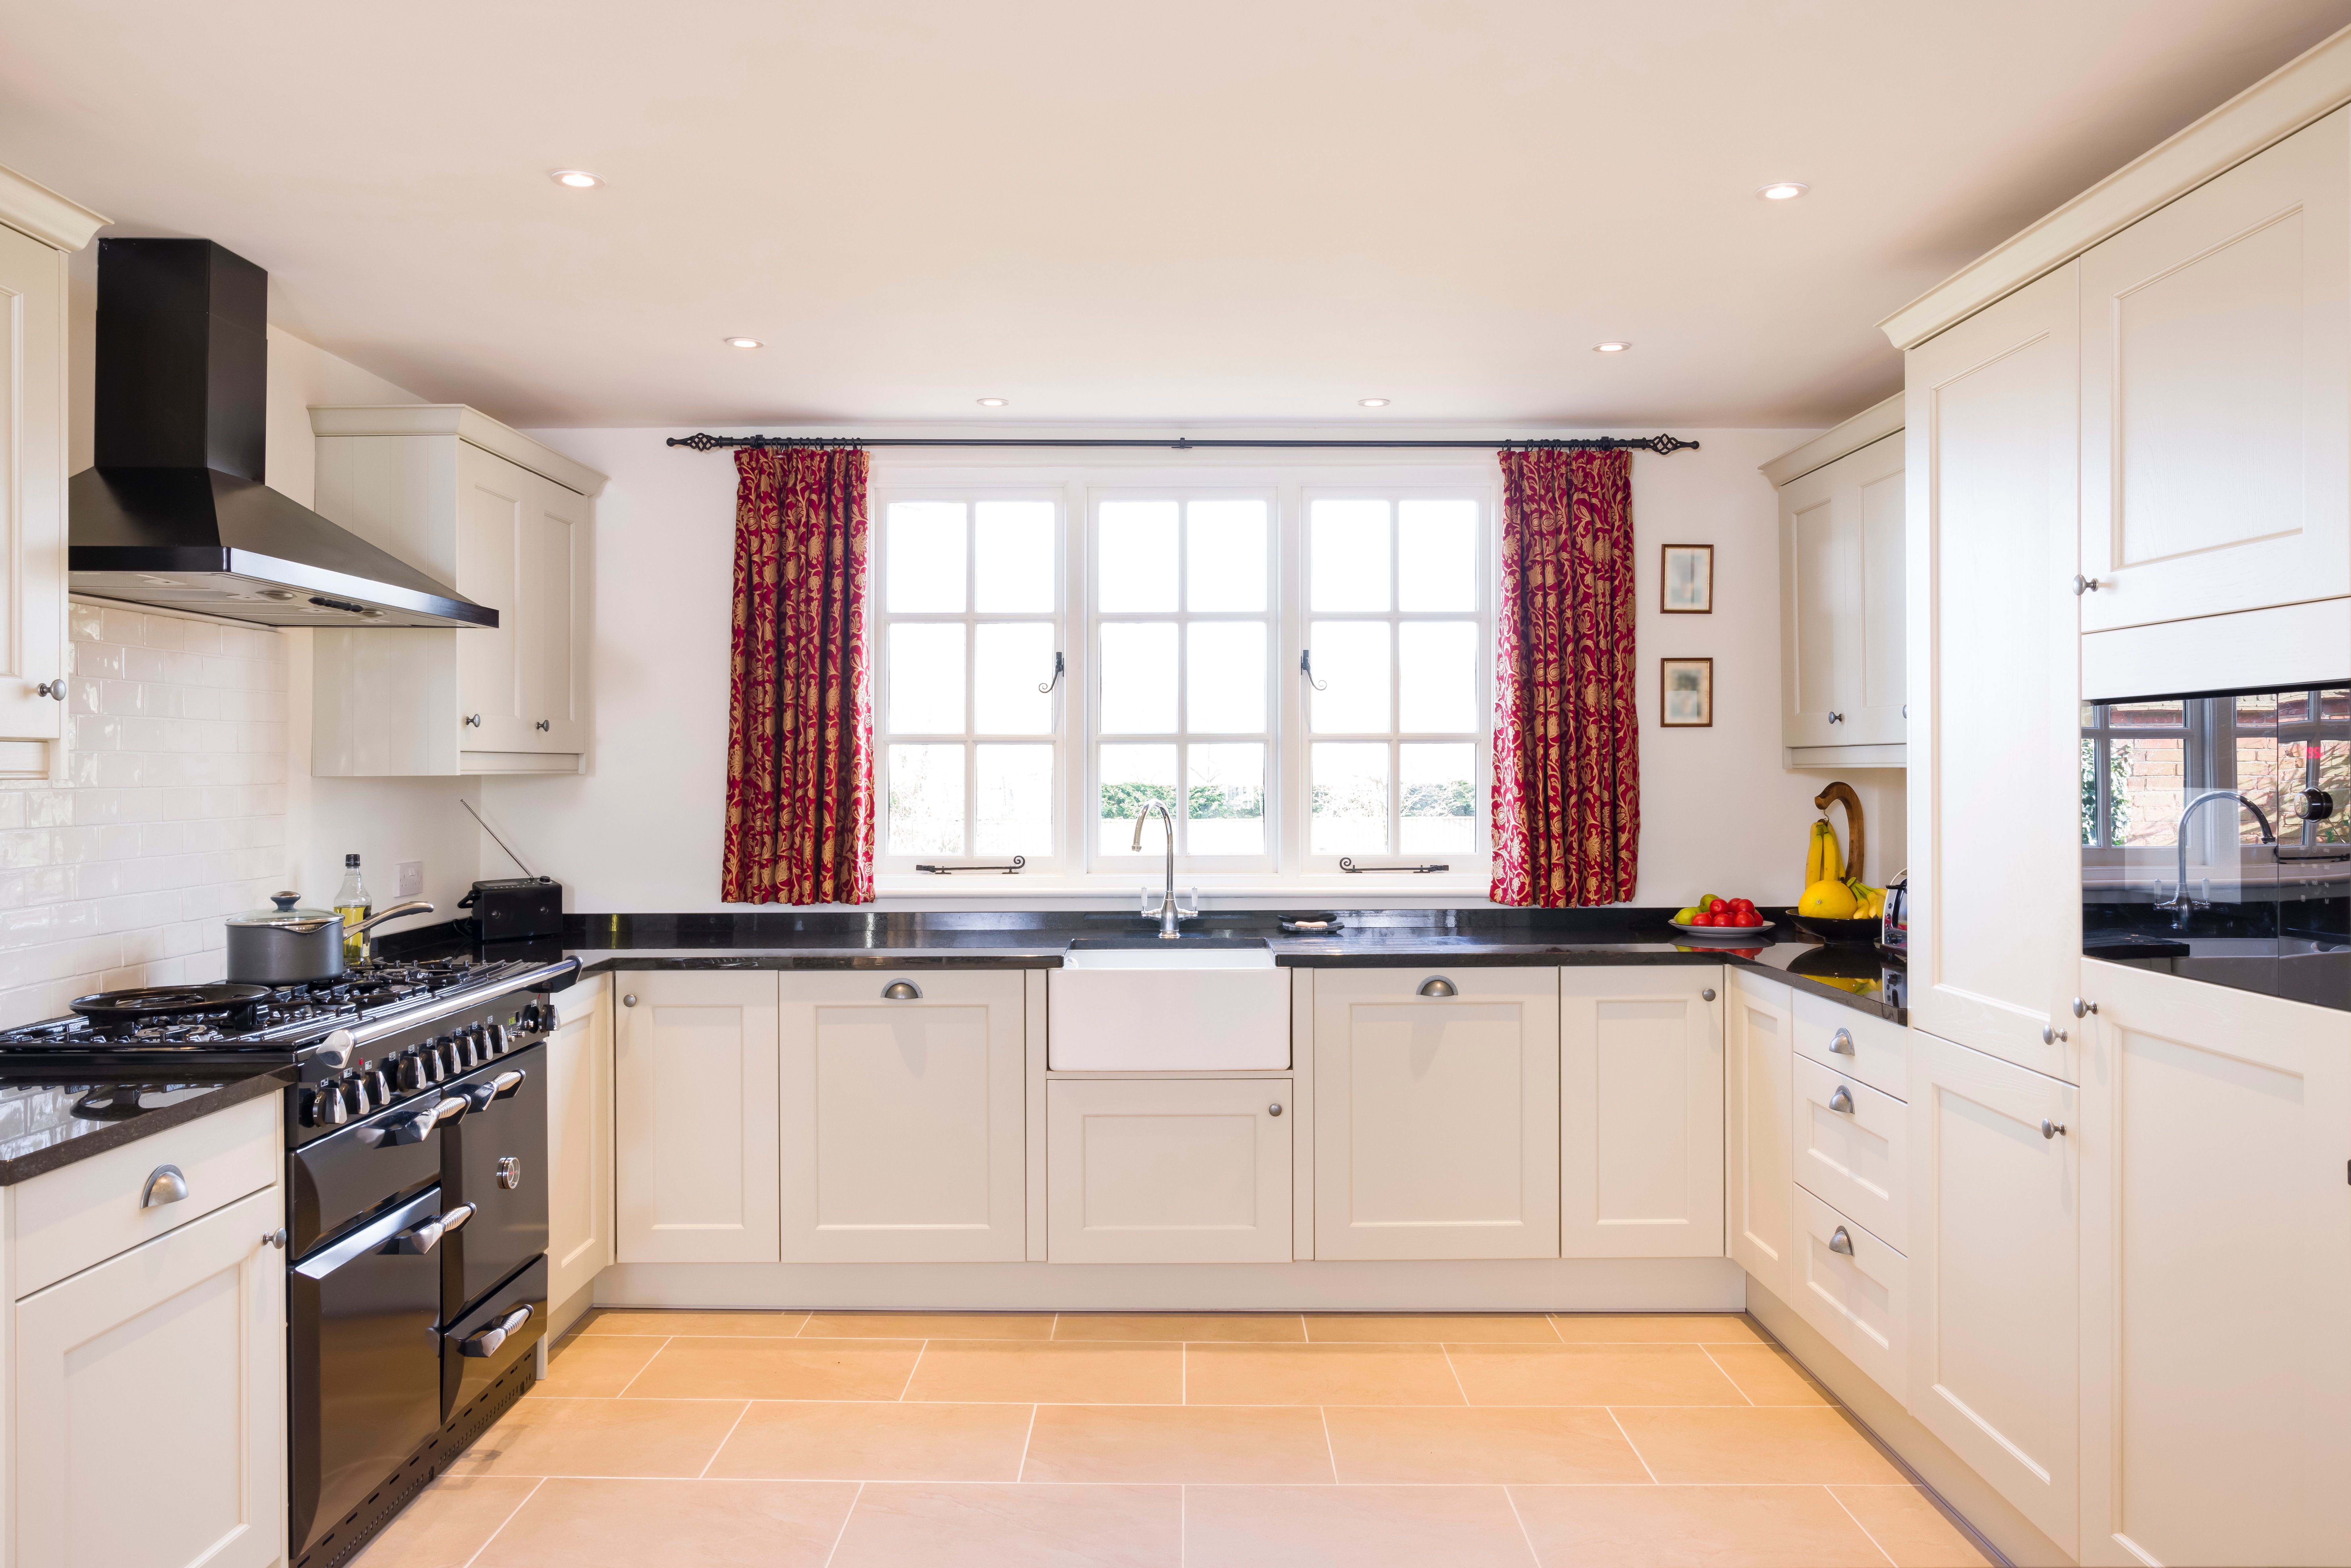 White kitchen with wooden floor, black worktops and red curtains